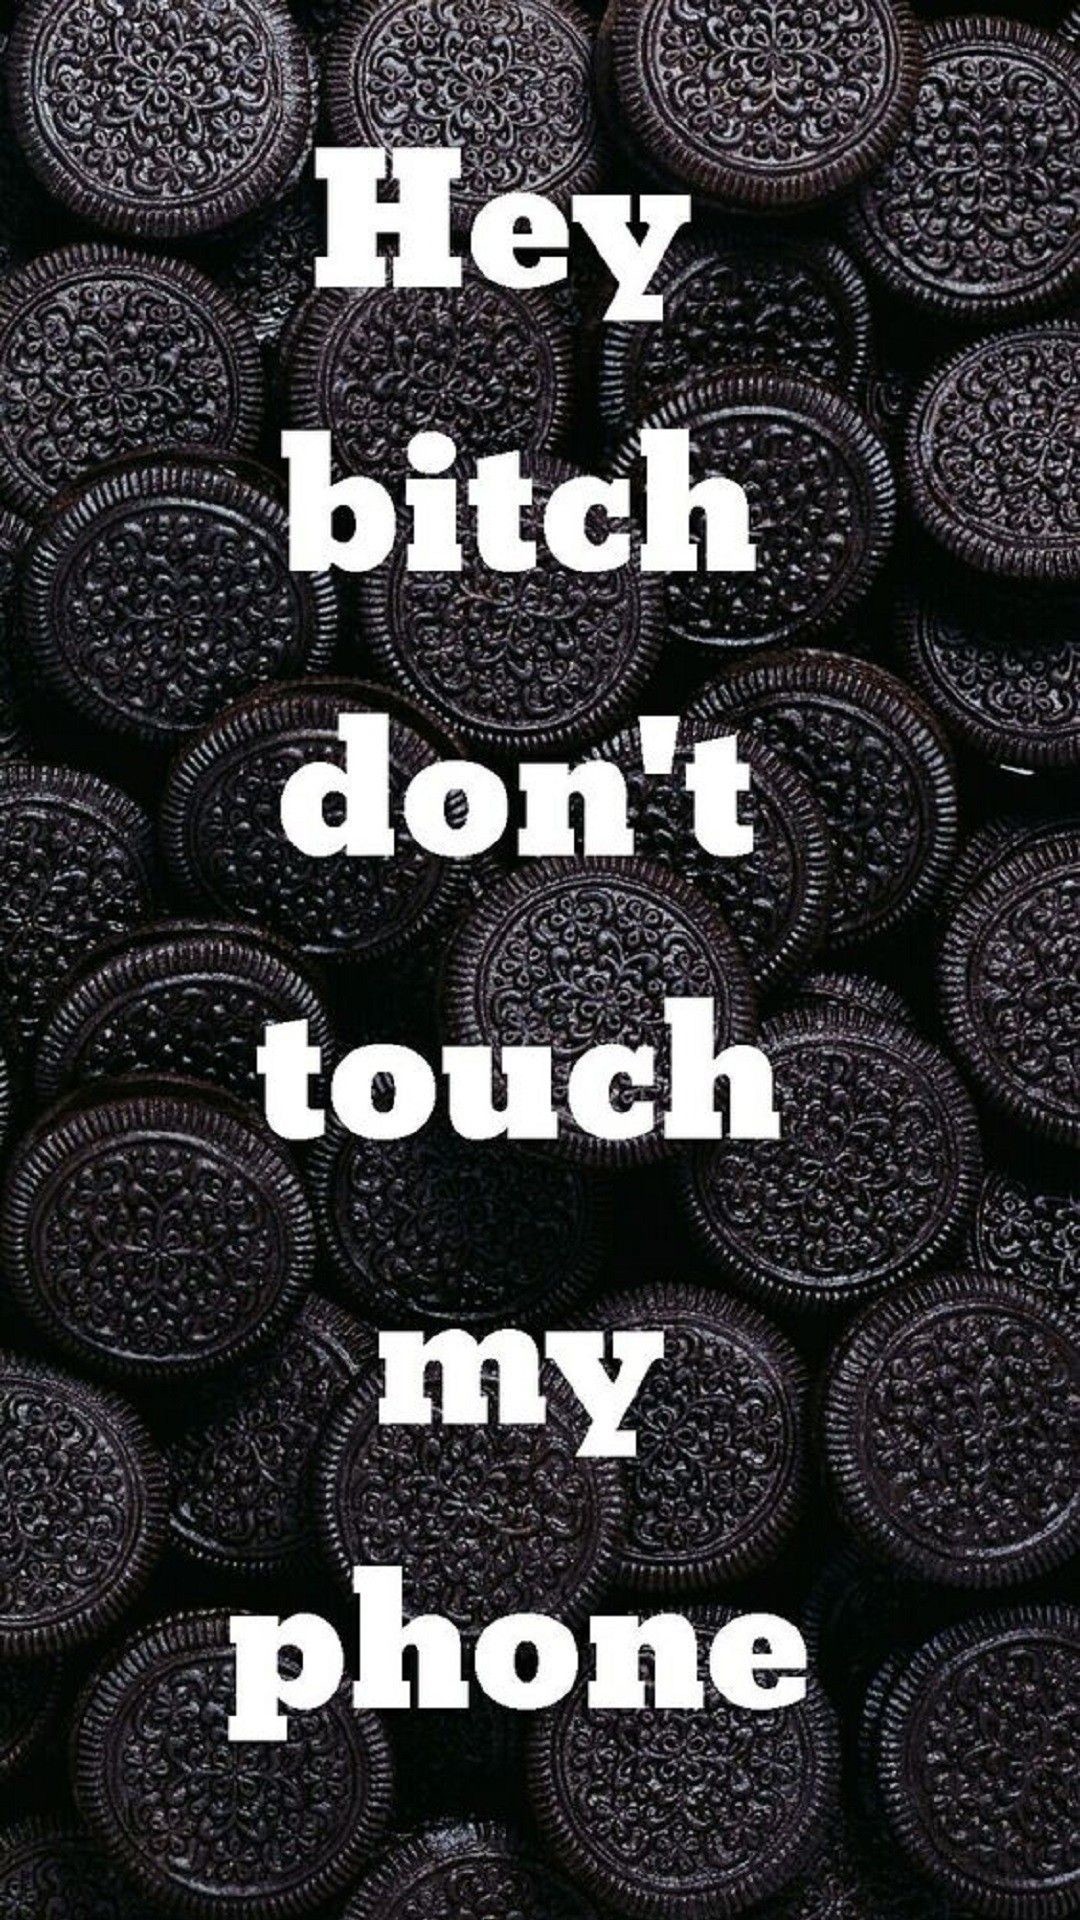 1080x1920 Hey bitch, don't touch my phone - Tap to see more don't #touch my #phone  wallpapers - @mobile9